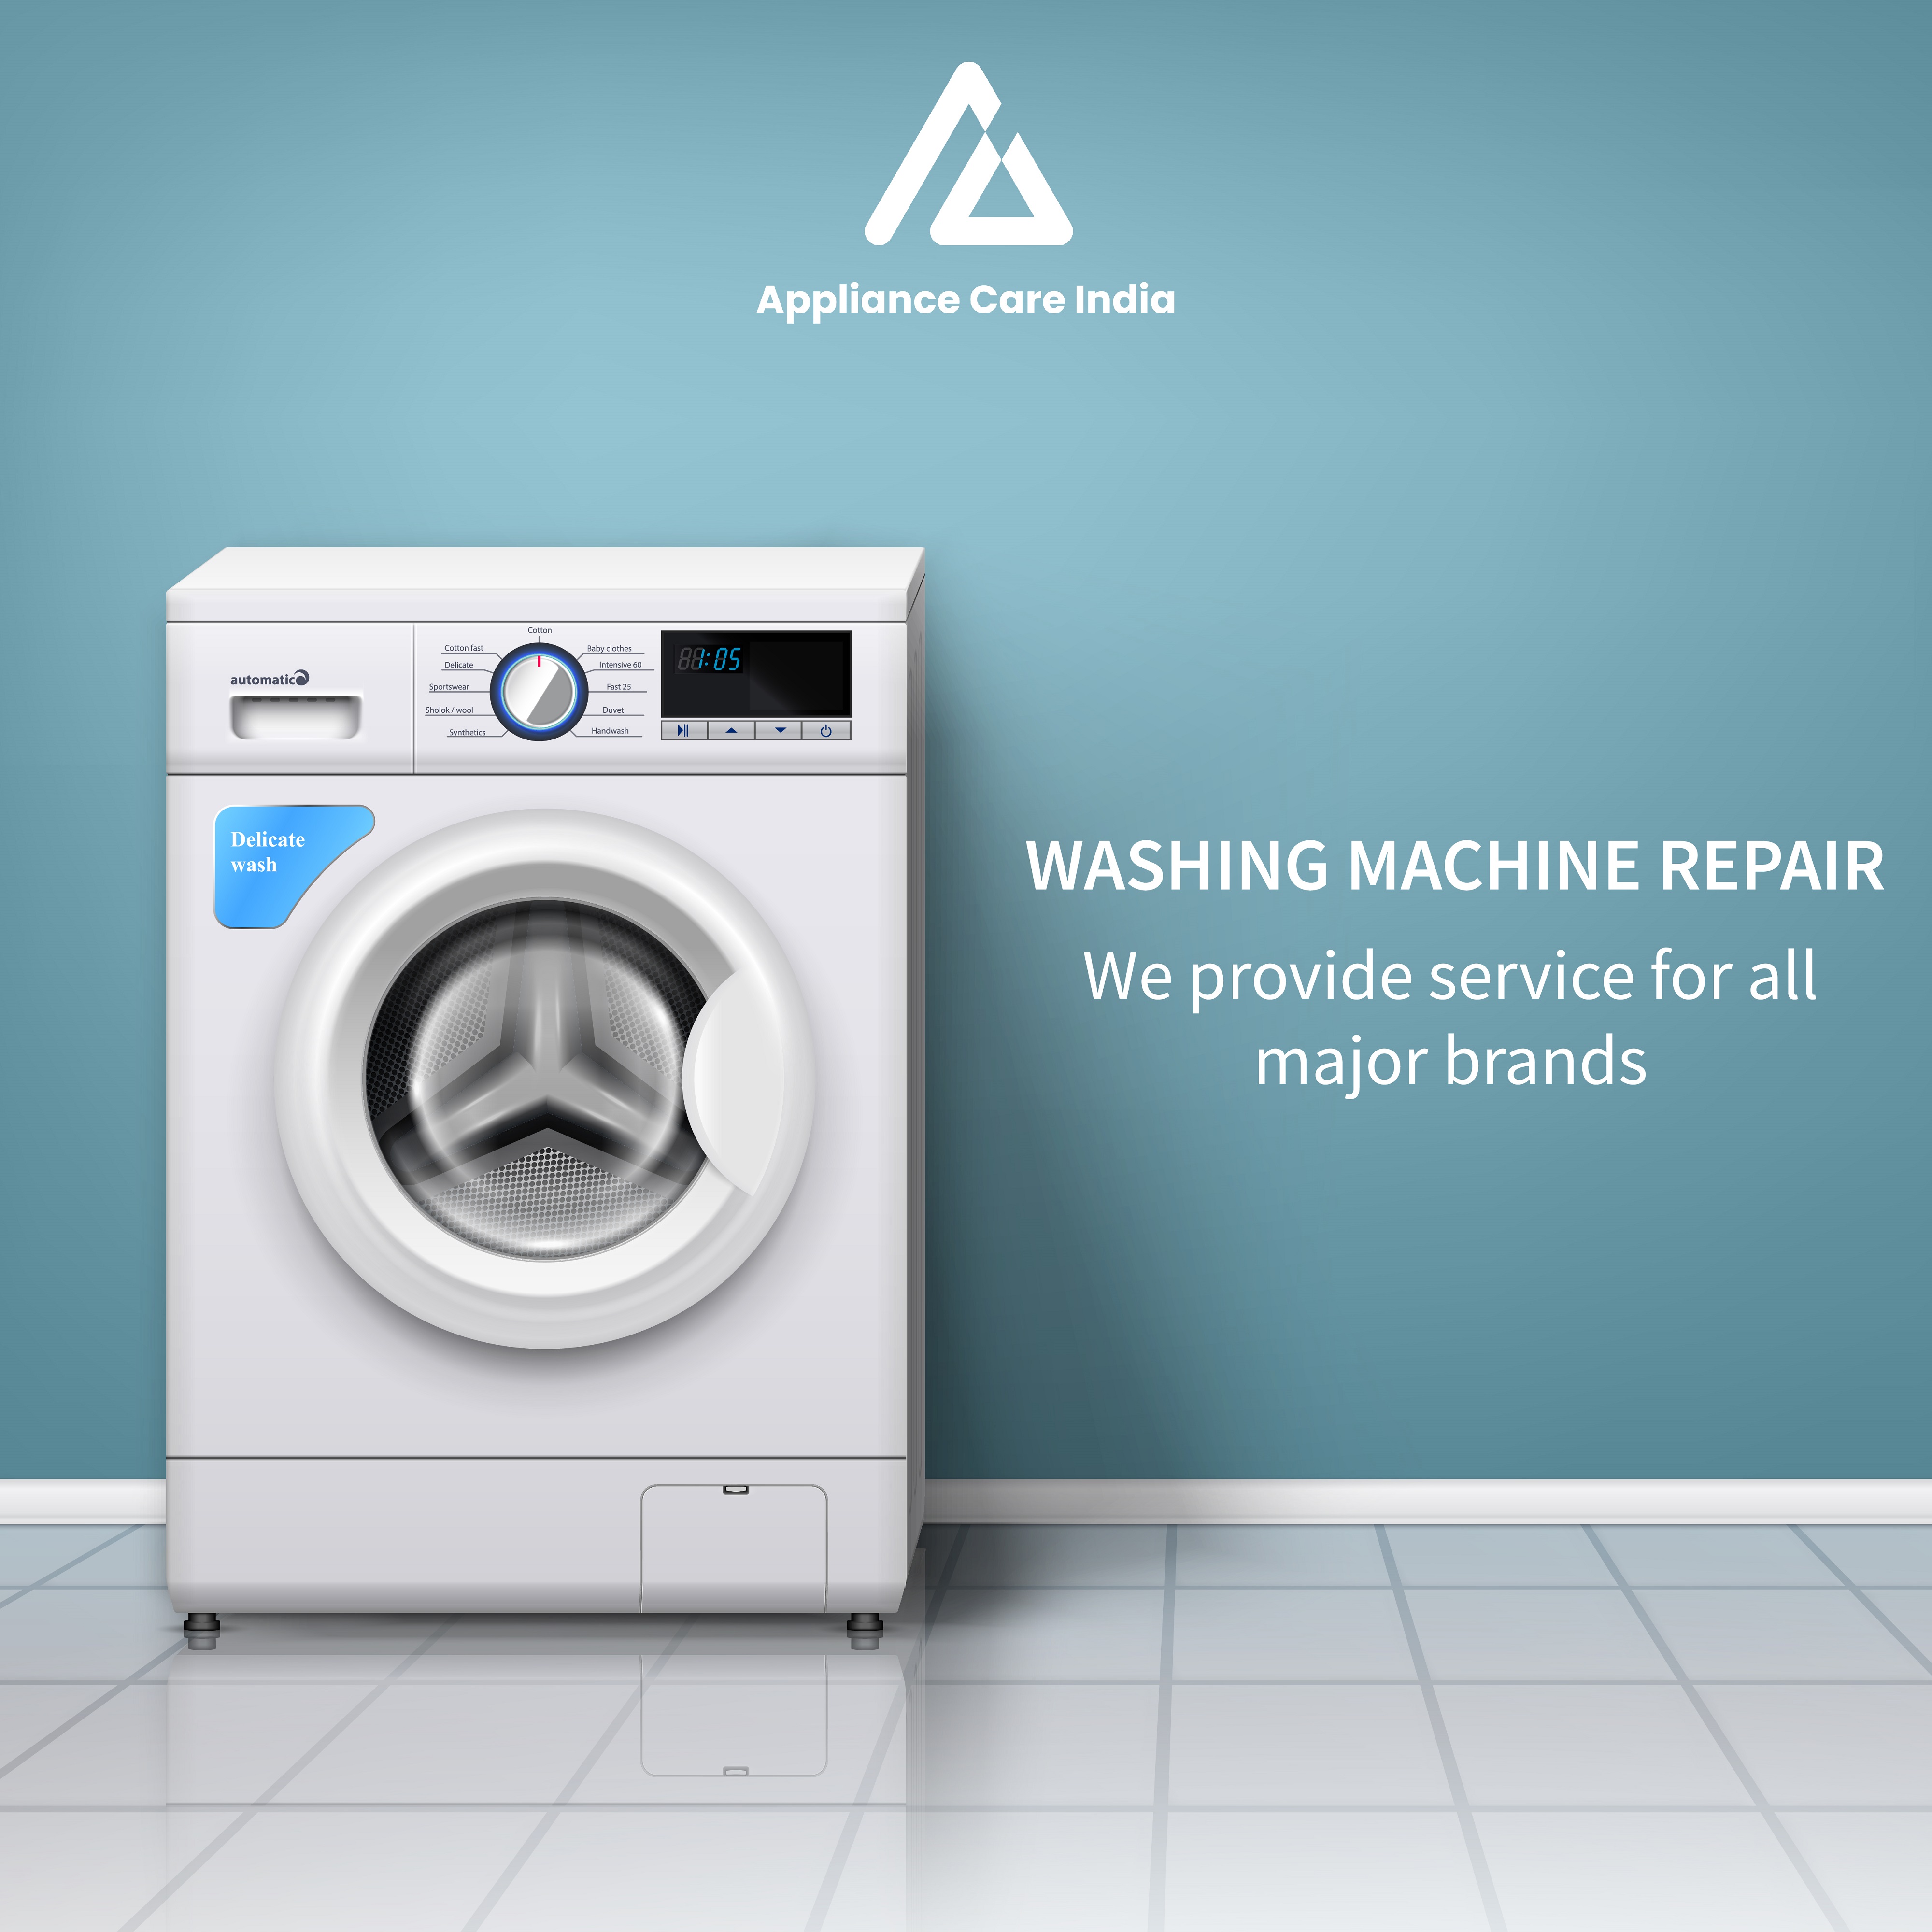 Washing Machine Repairing Services from Appliance Care India